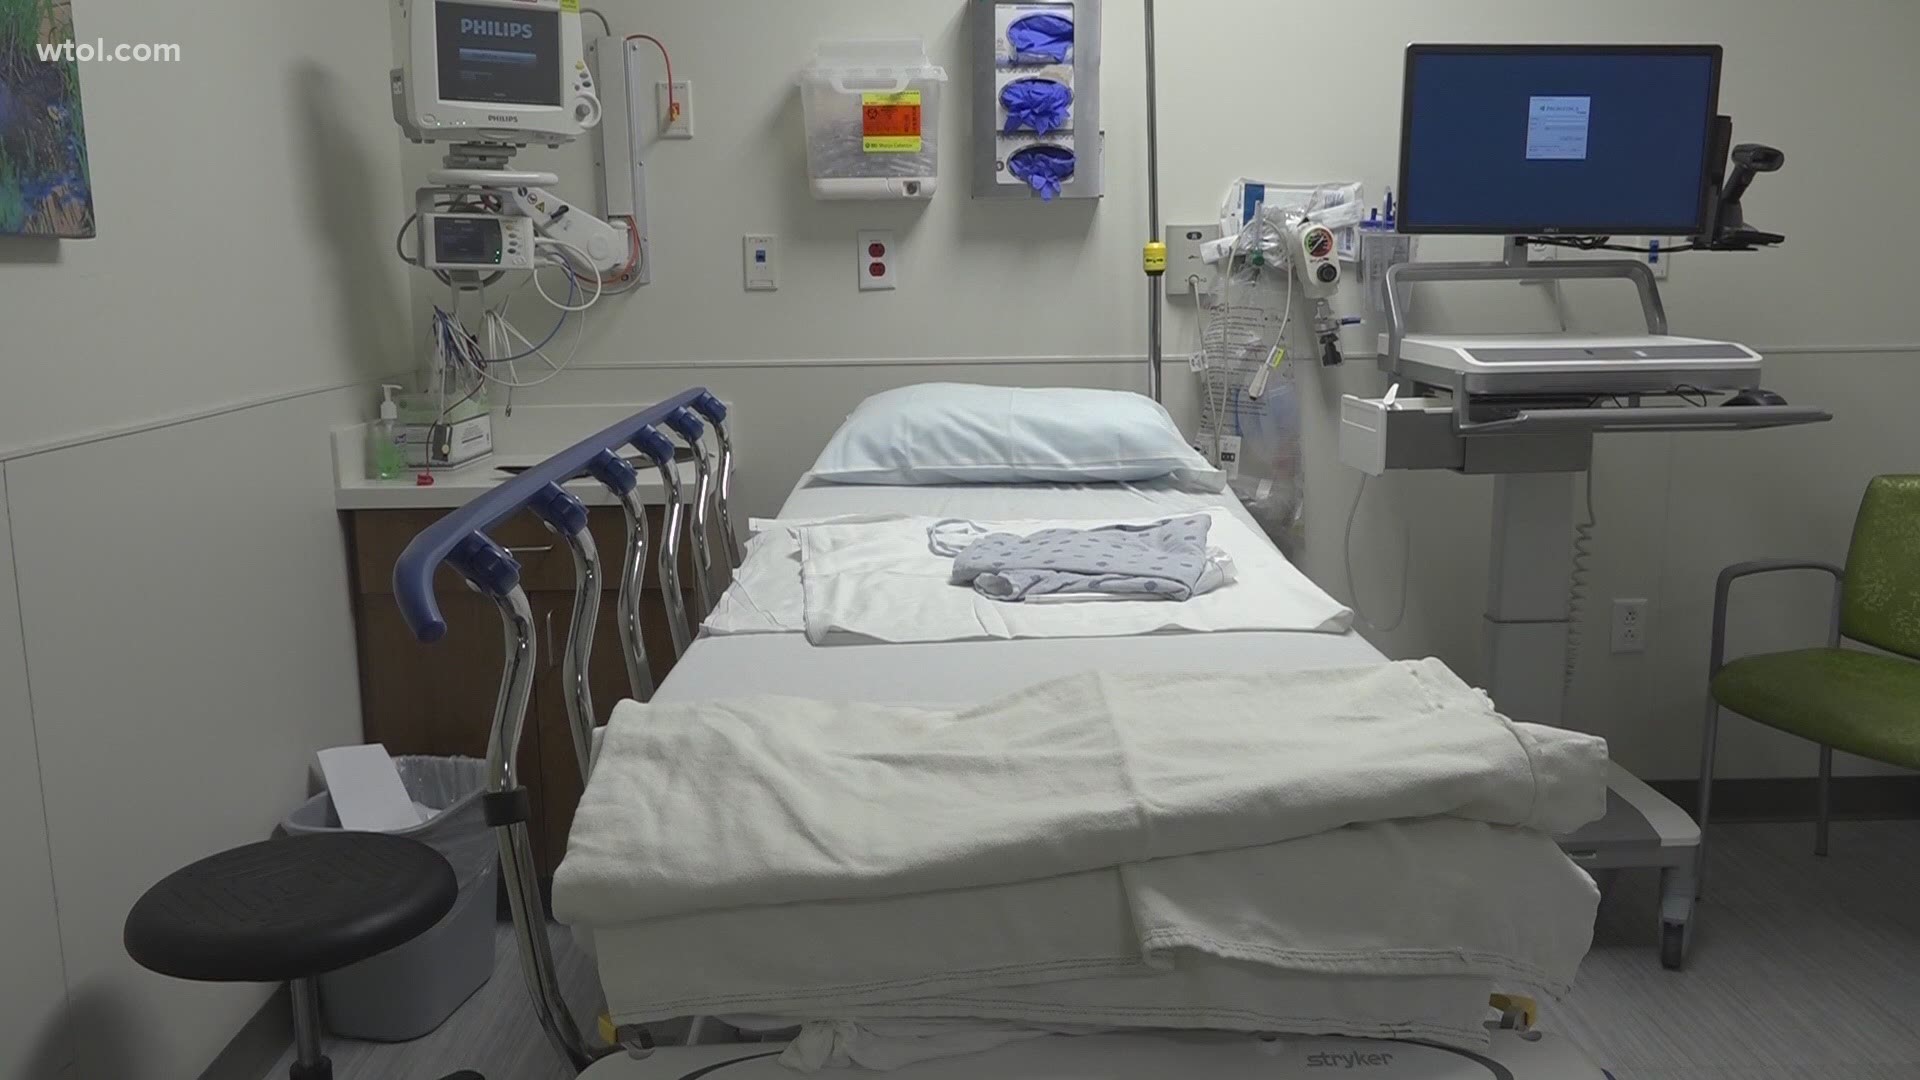 A statewide rise in COVID-19 cases has caused increased concern for healthcare workers.